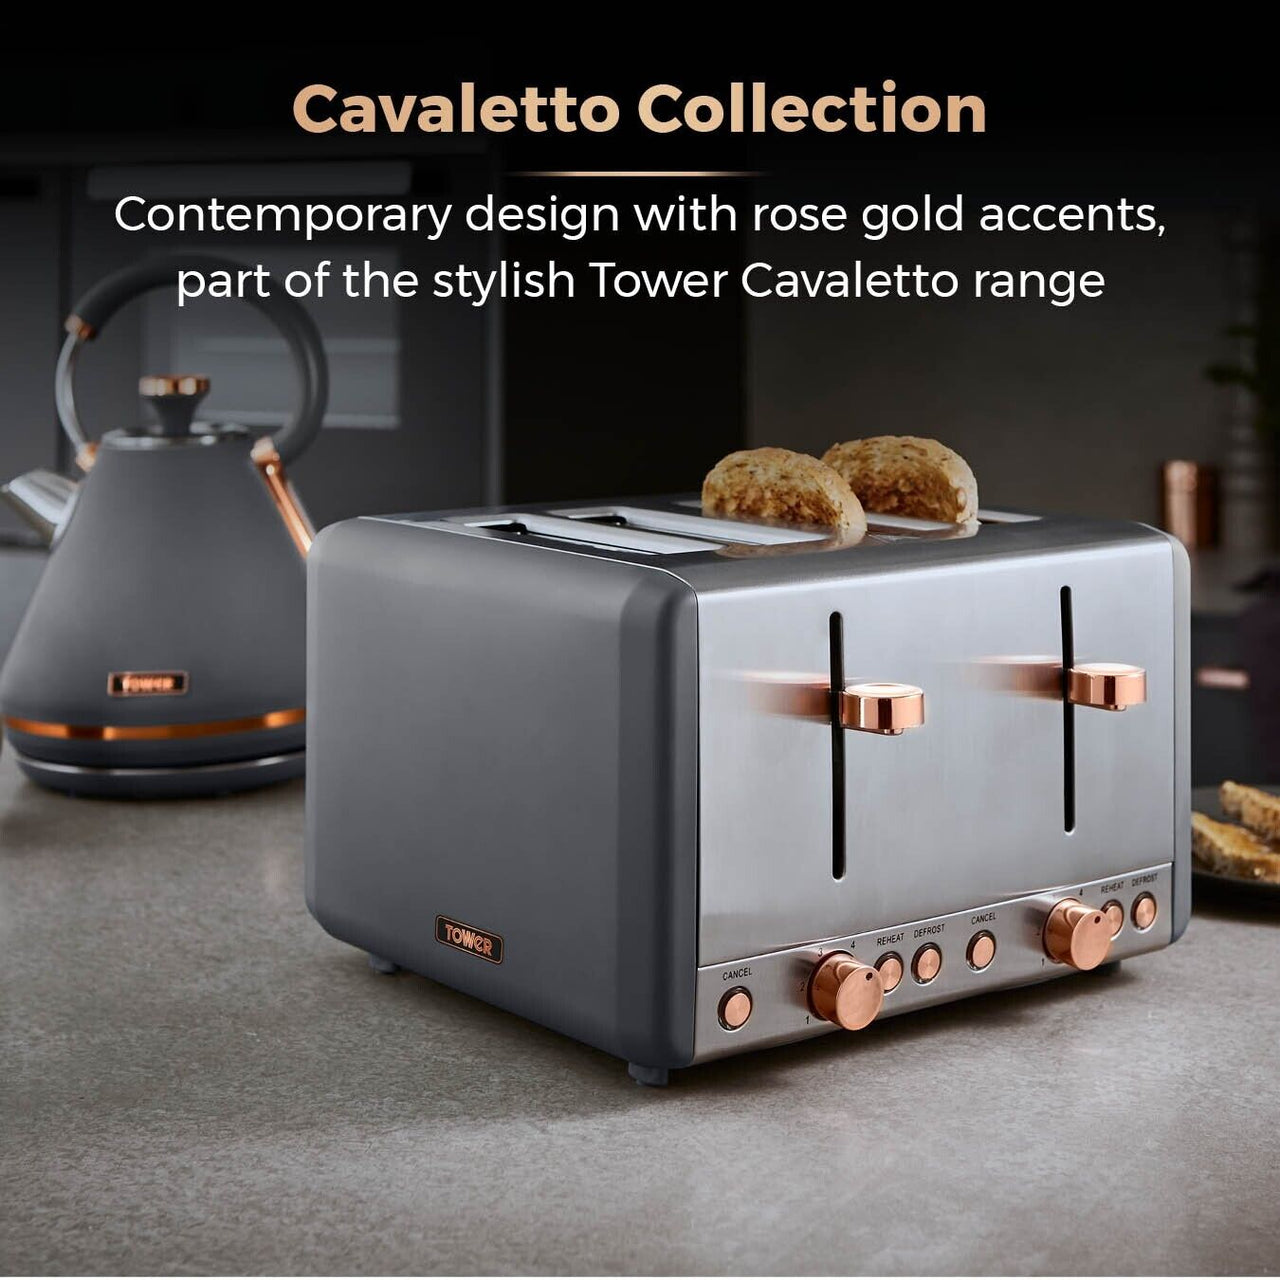 Tower Cavaletto Grey Kettle 4 Slice Toaster Air Fryer Bread Bin & Canisters Set